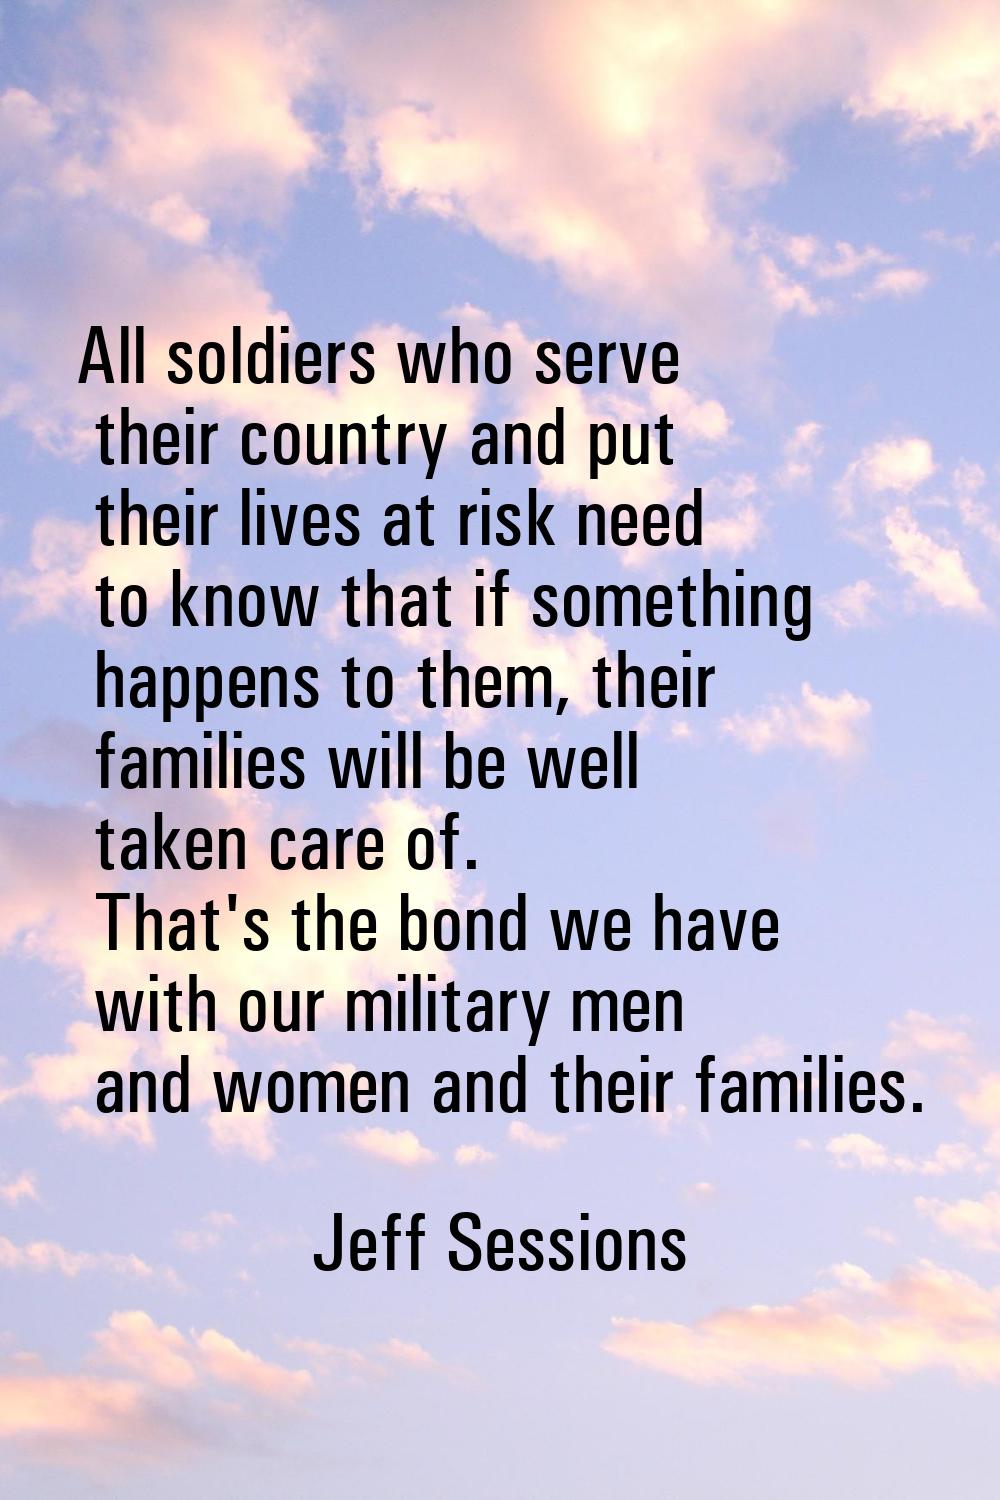 All soldiers who serve their country and put their lives at risk need to know that if something hap